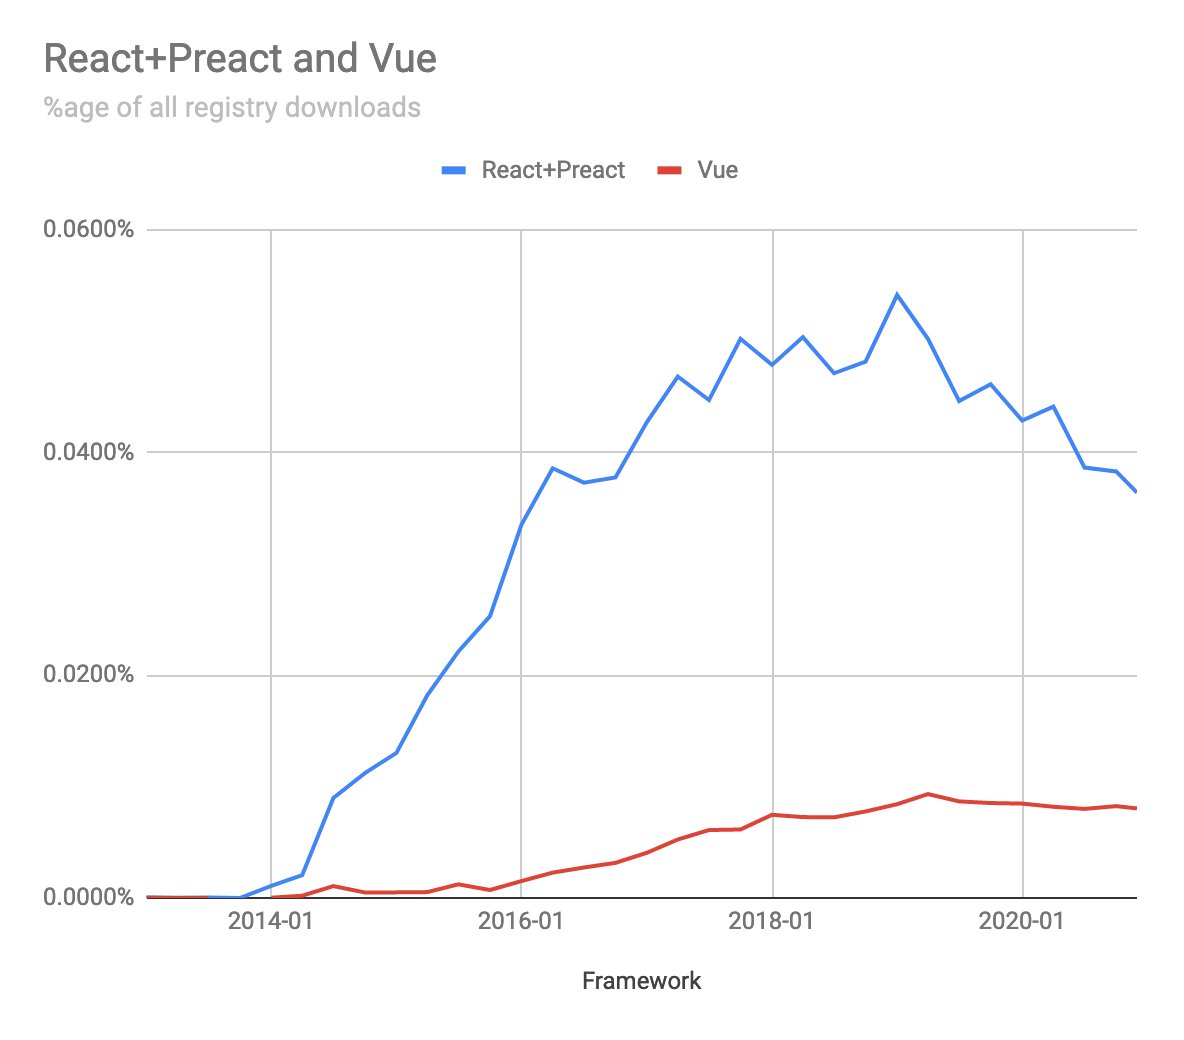 But the decline in React(+Preact) and Vue don't seem to match up very well. React's decline seems to be going elsewhere. If you can think of a potential alternative that might be it, please reply and I'll pull the data!